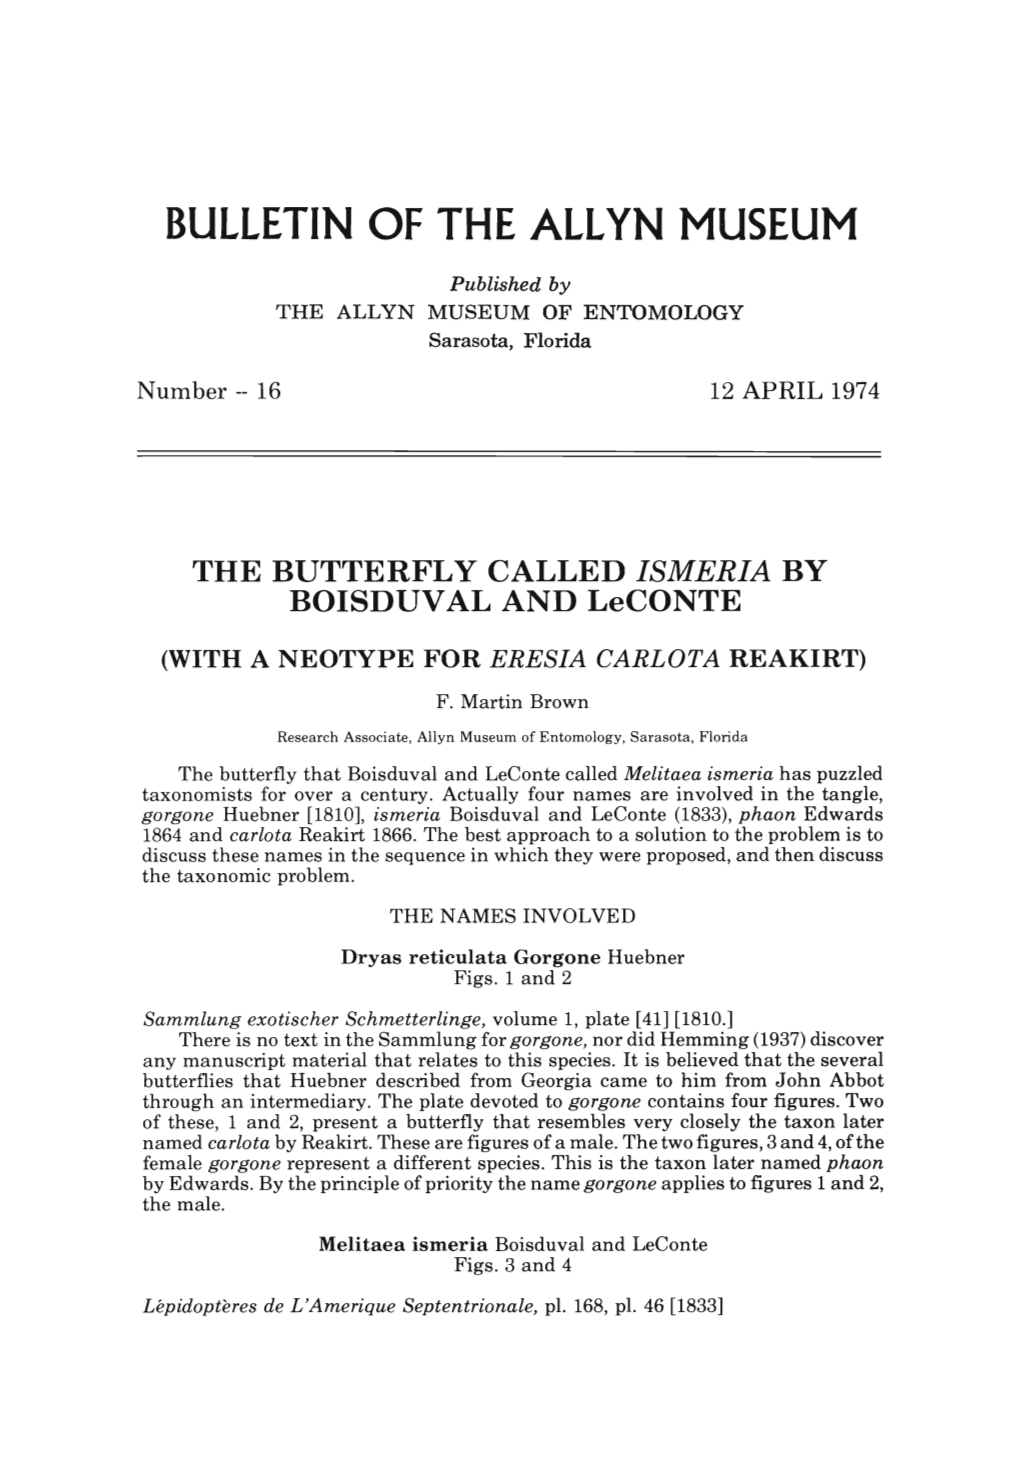 THE BUTTERFLY CALLED ISMERIA by BOISDUVAL and Leconte